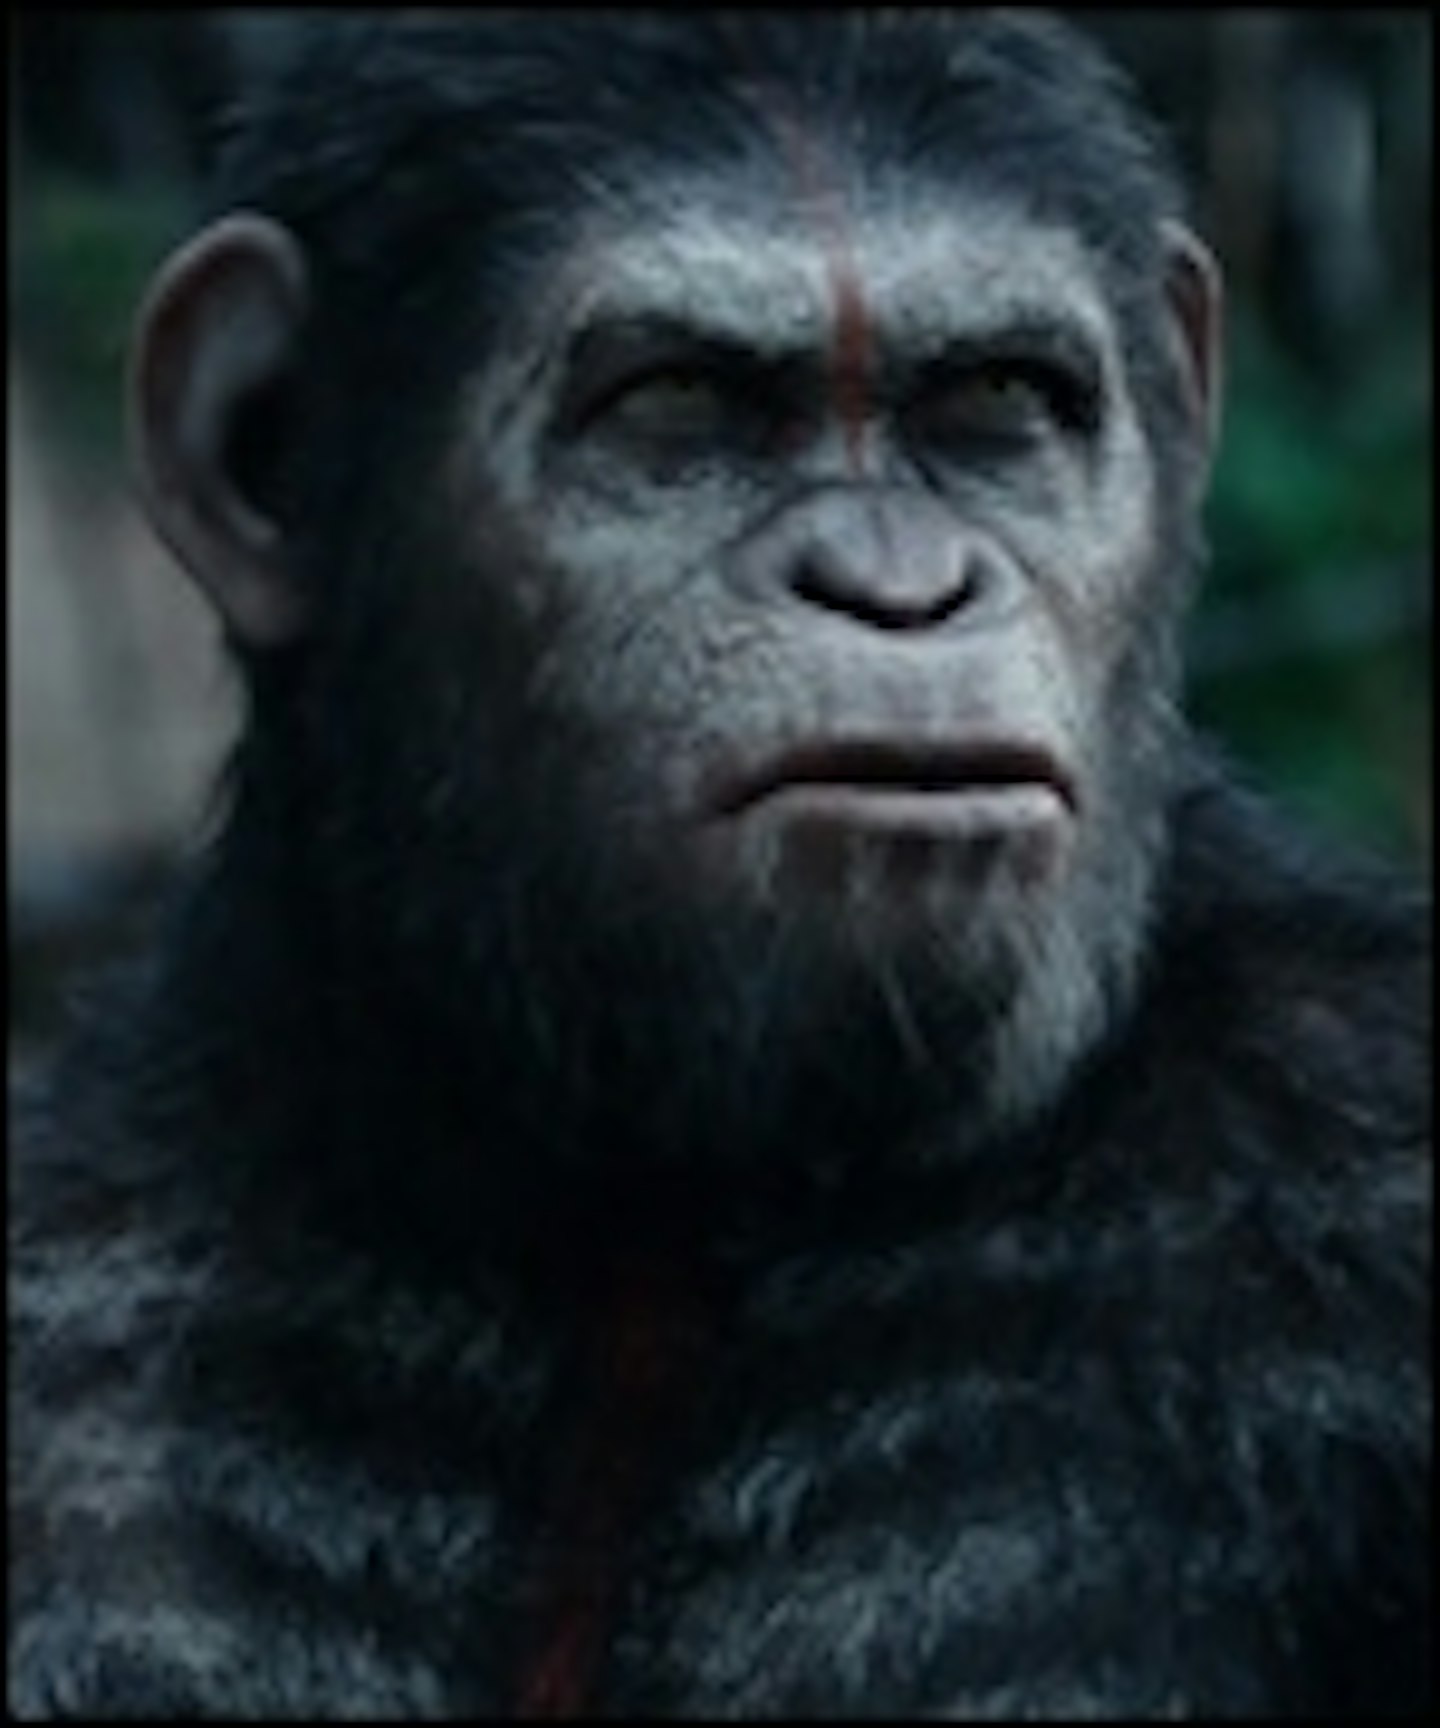 Two New Dawn Of The Planet Of The Apes Clips Land